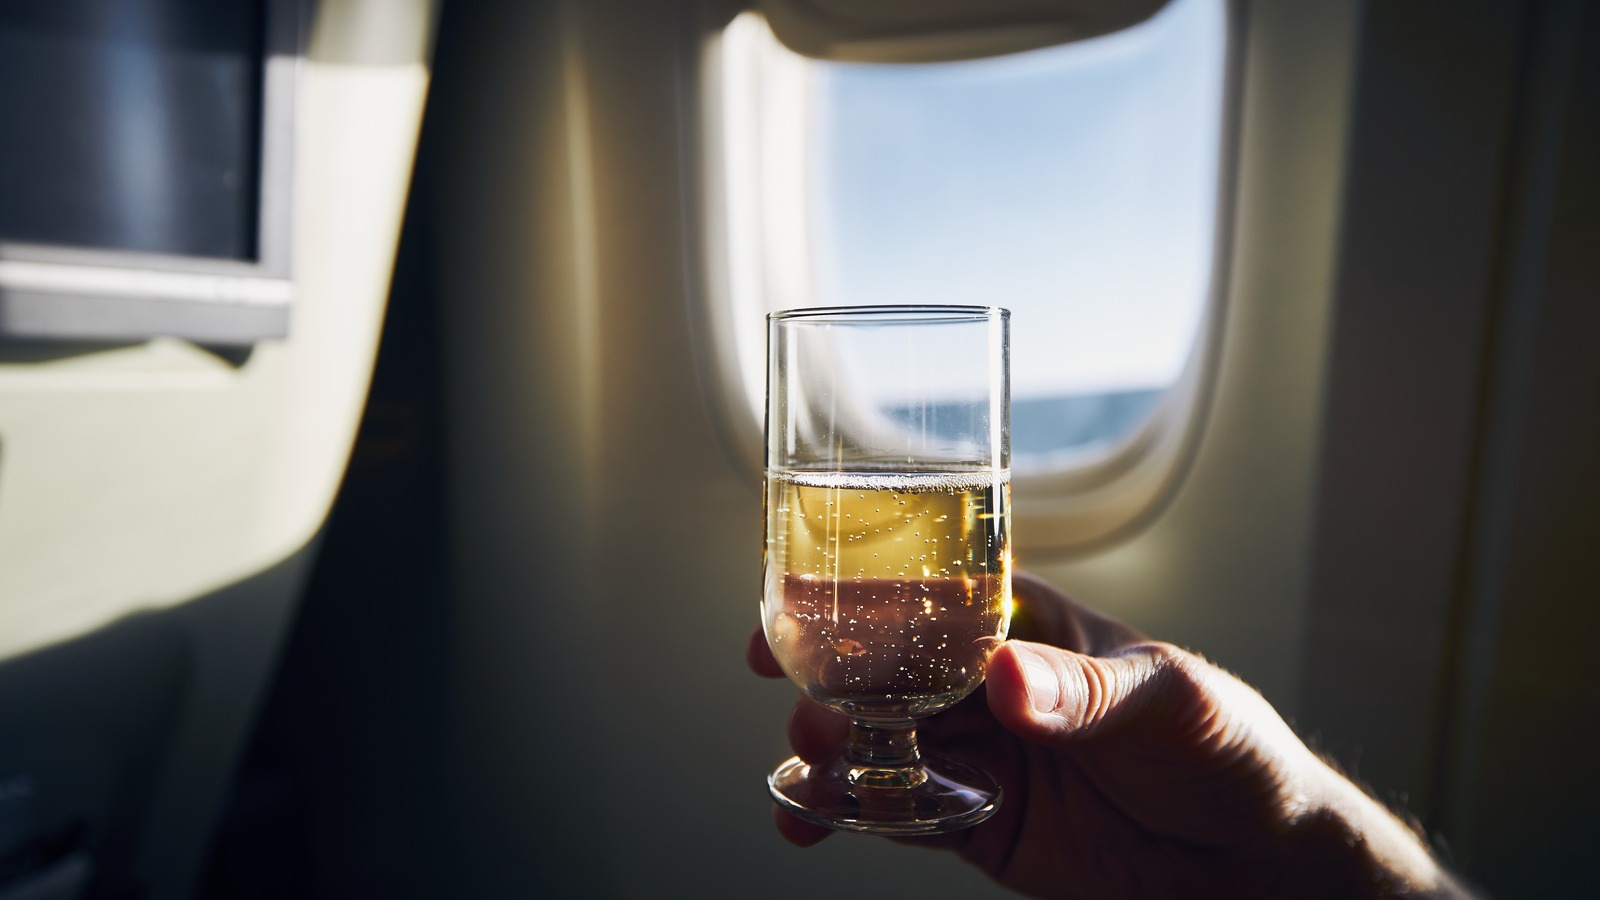 Don't Bother Ordering Prime Wine on a Plane